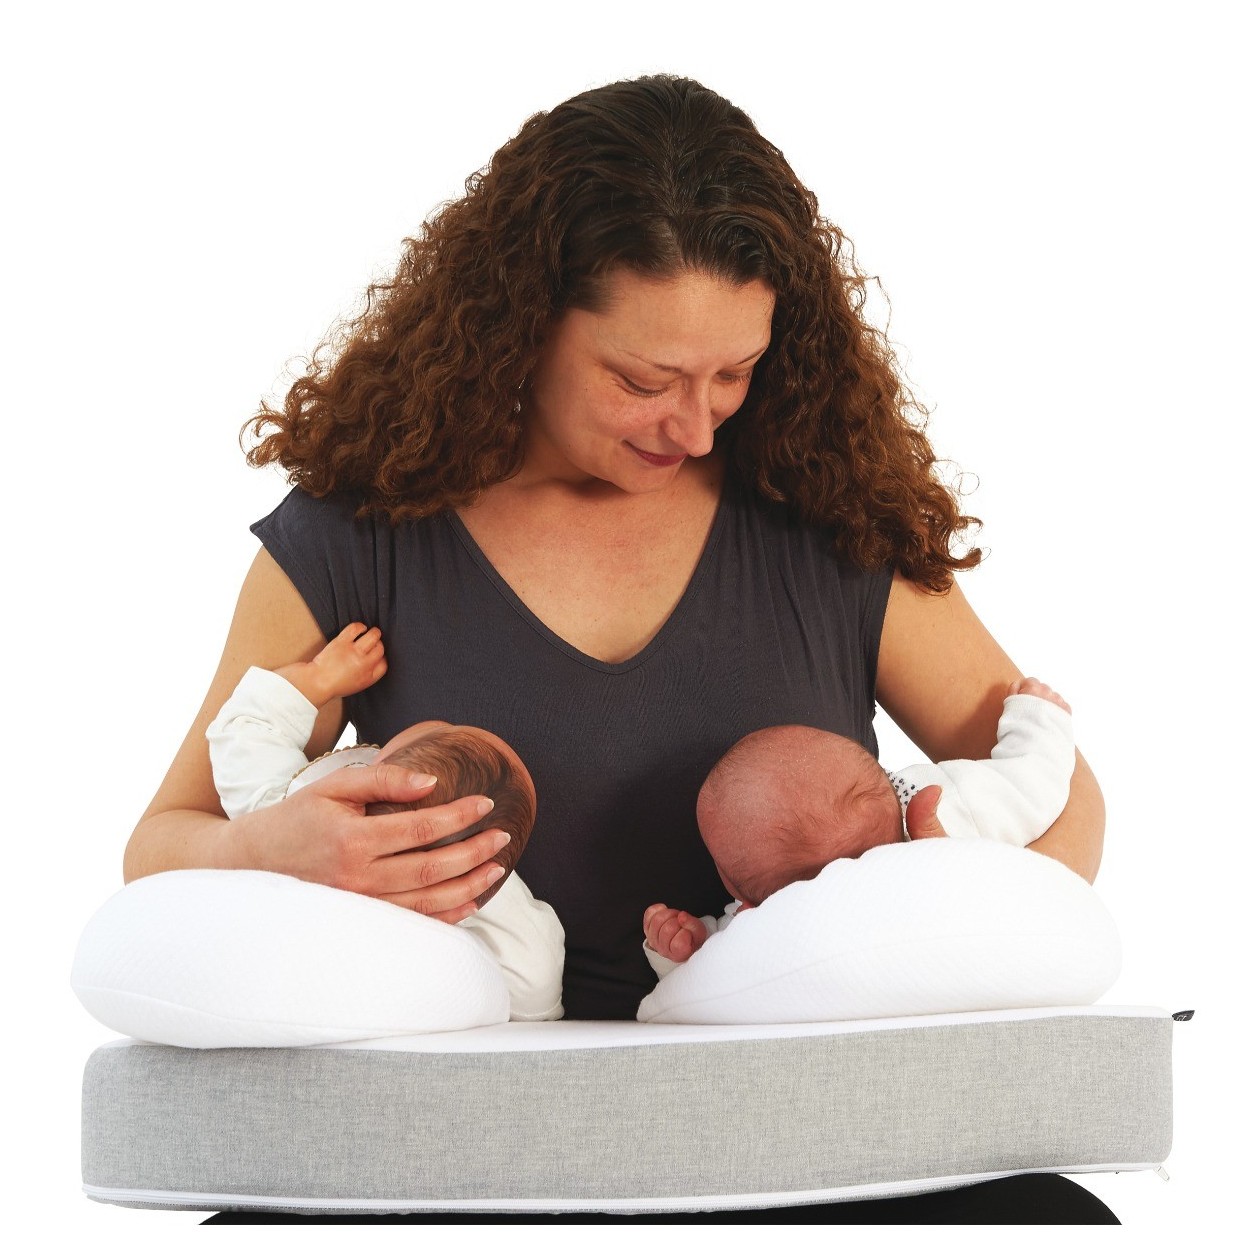 Breastfeeding positions guide: in pictures